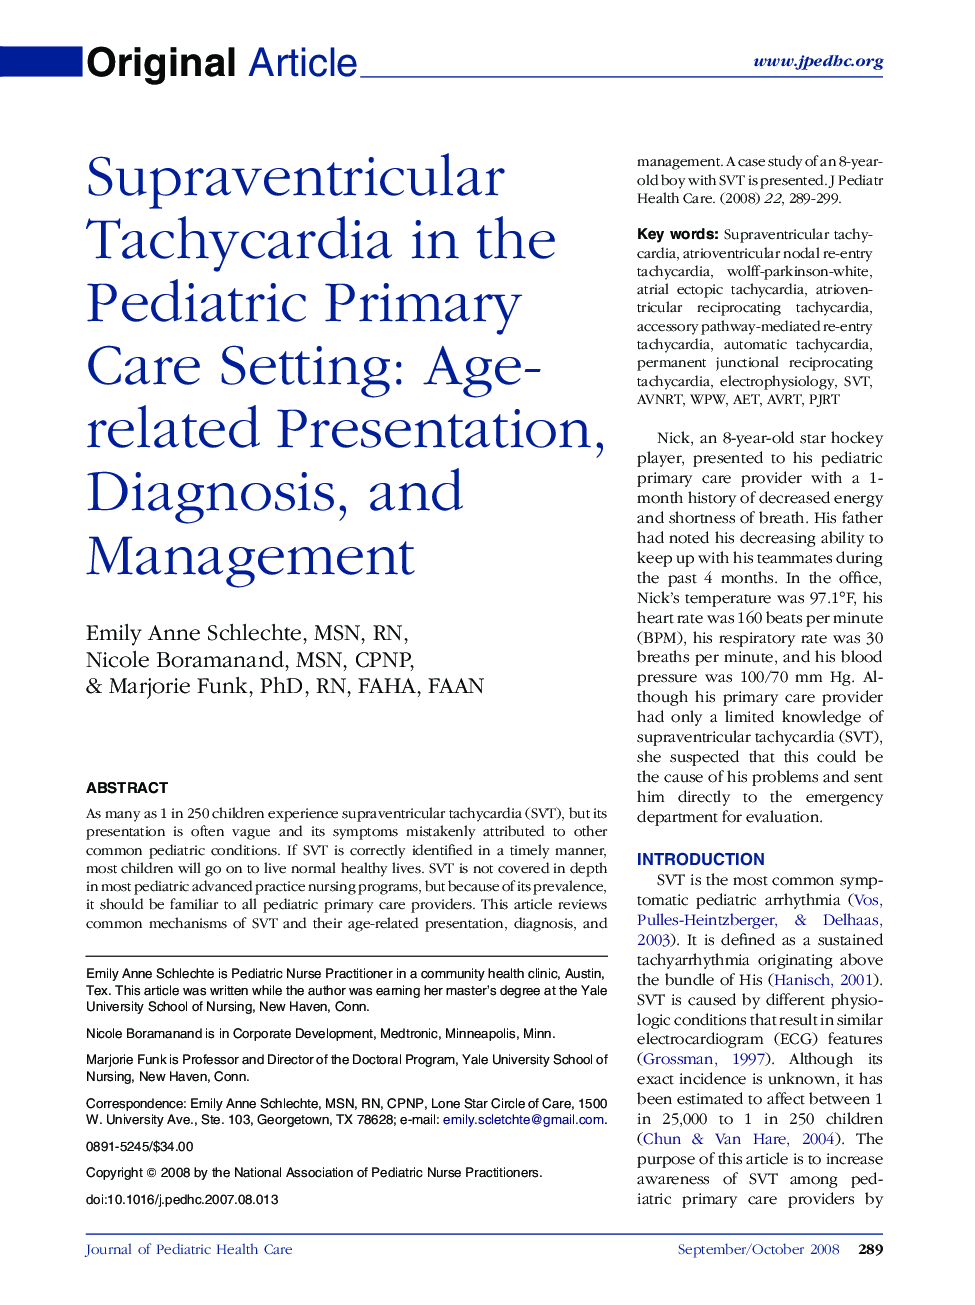 Supraventricular Tachycardia in the Pediatric Primary Care Setting: Age-related Presentation, Diagnosis, and Management